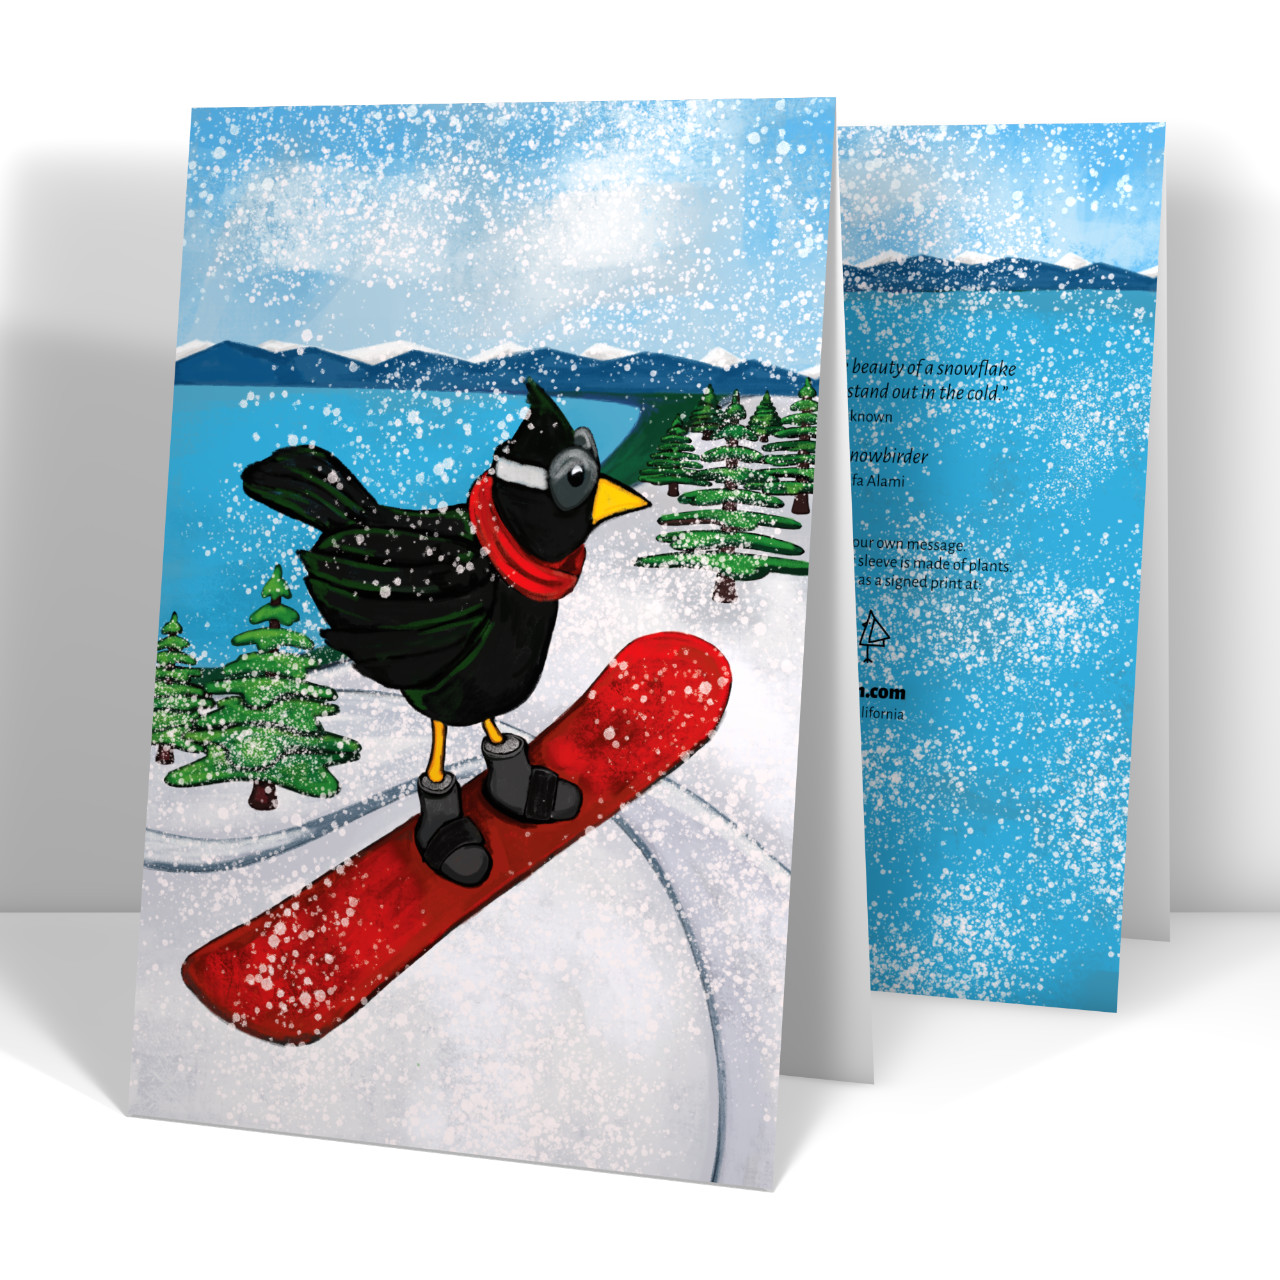 Painting of a bird on a snowboard